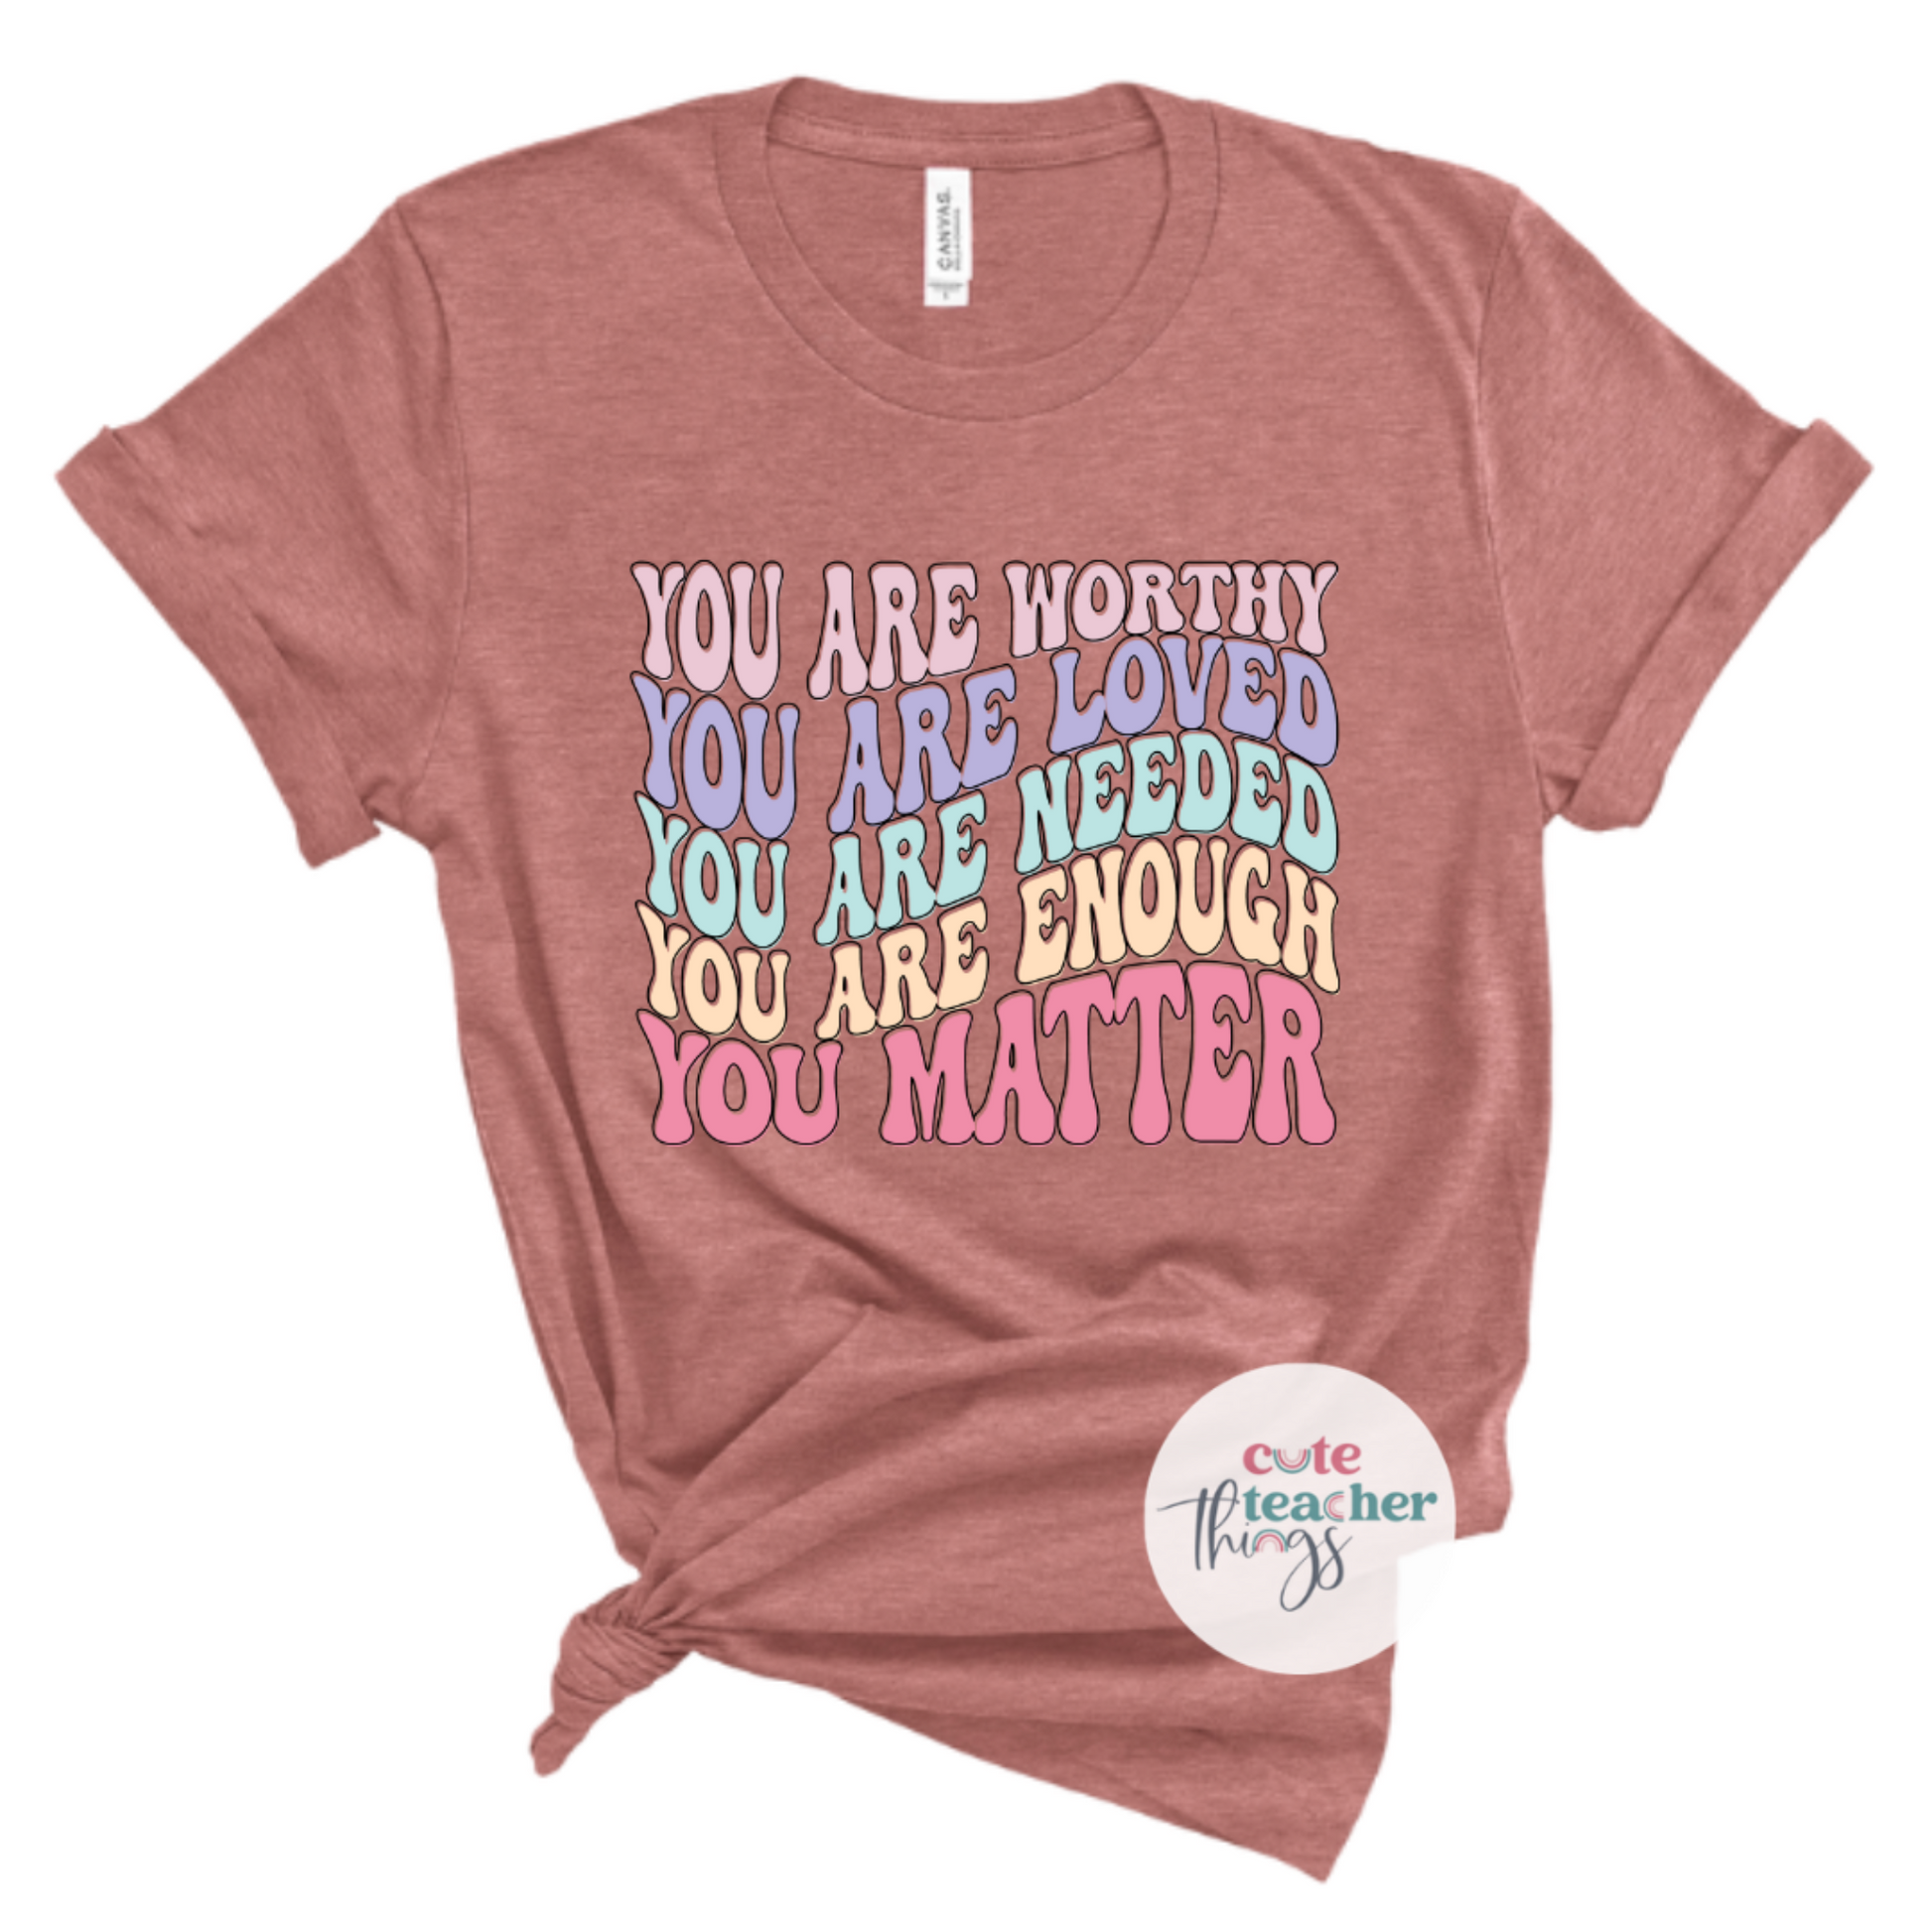 you are worthy loved needed enough you matter tee, mental health t-shirt, teacher ootd